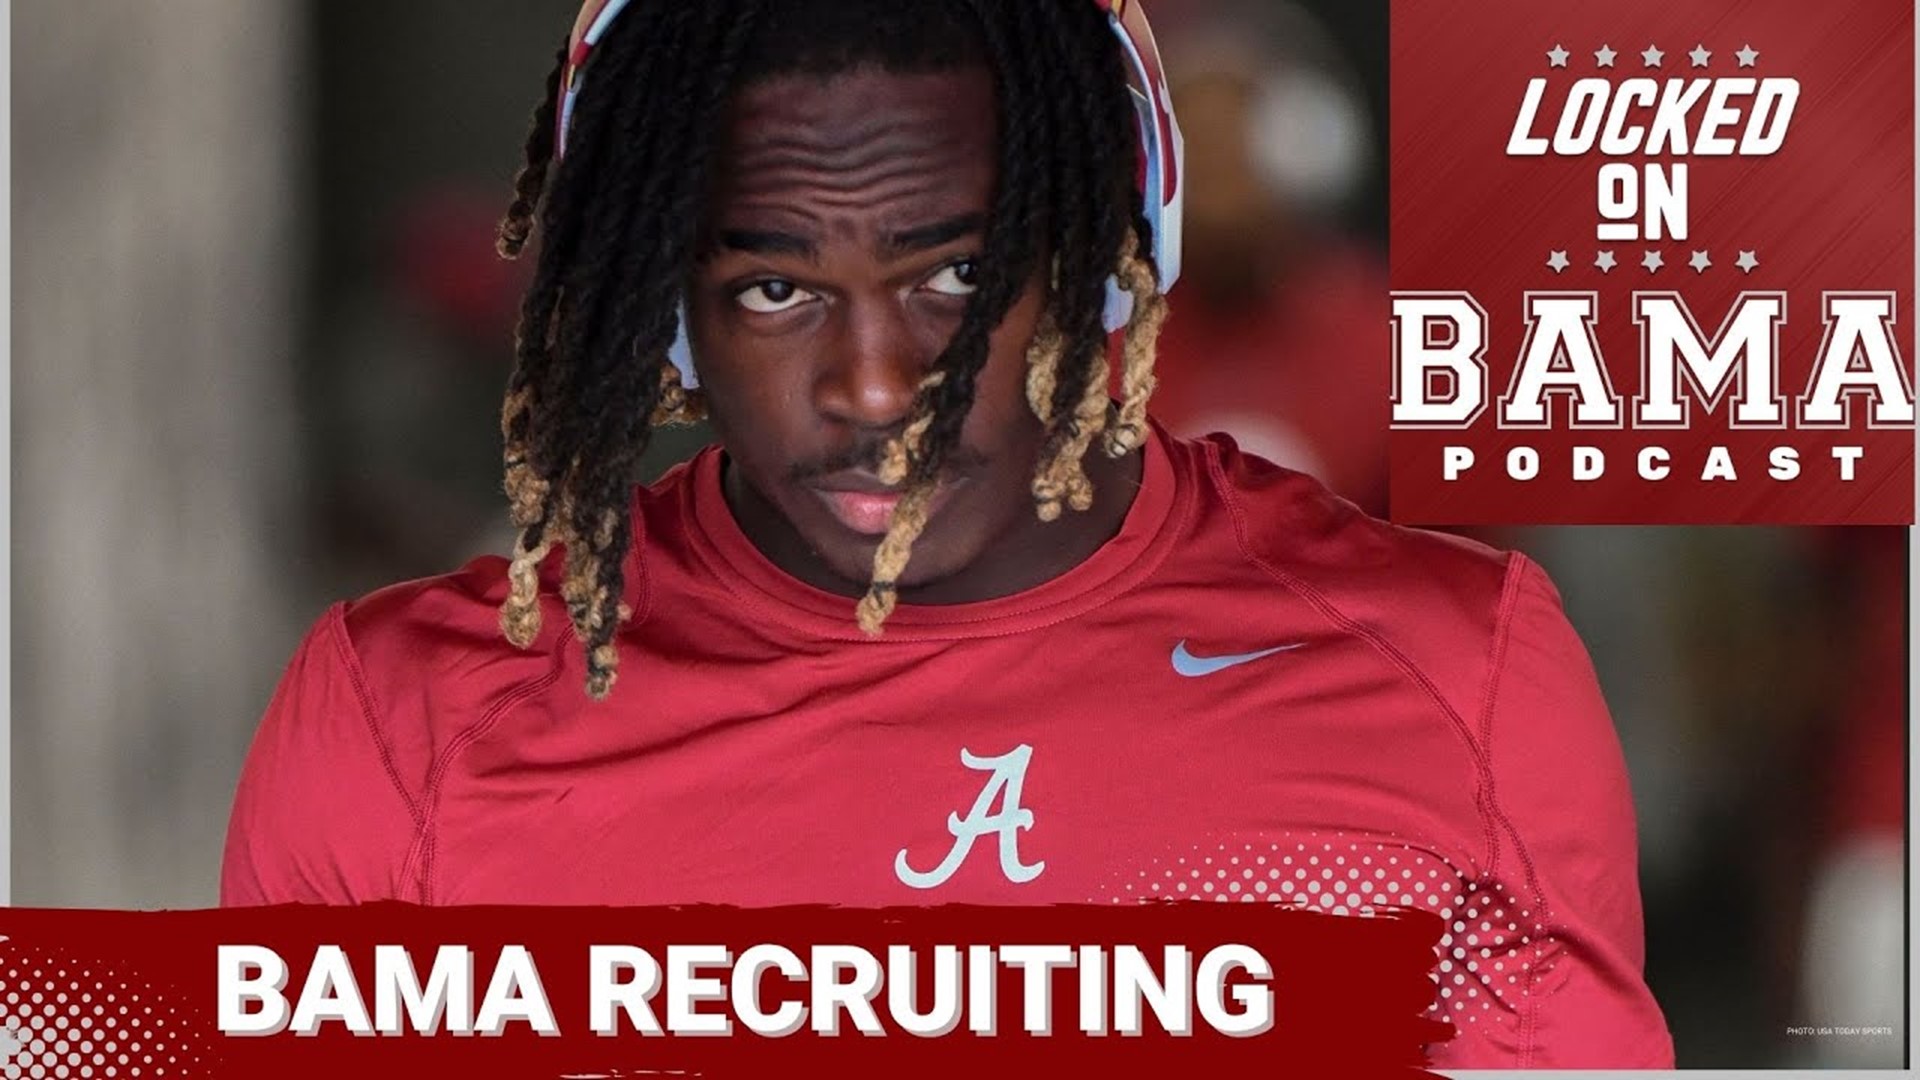 Alabama recruiting is always a topic Luke and Jimmy love to discuss and luckily it is going as well as ever right now!